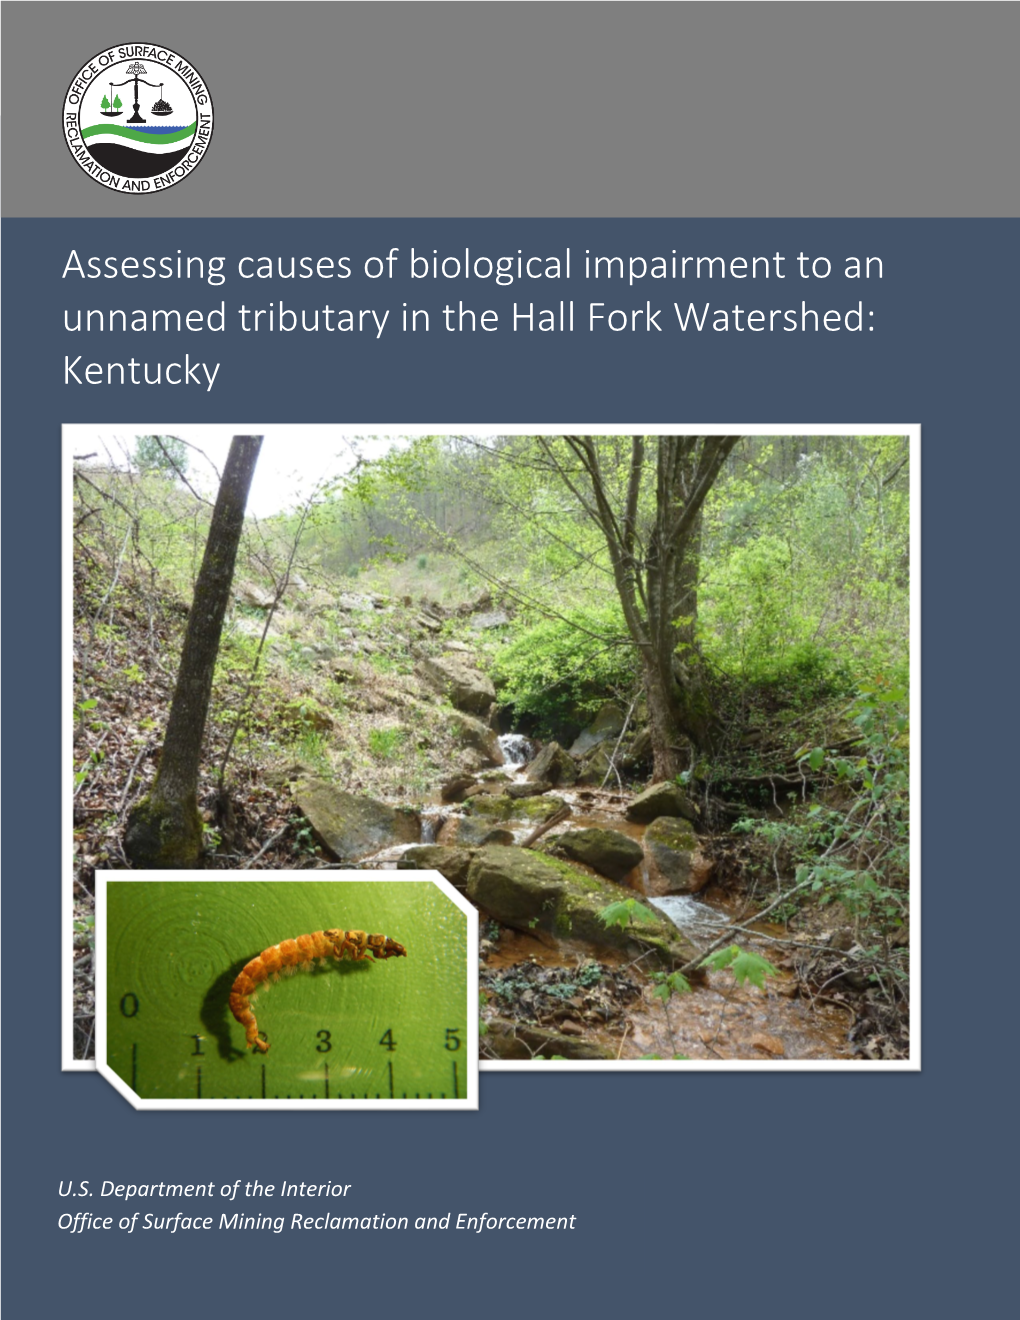 Assessing Causes of Biological Impairment to an Unnamed Tributary in the Hall Fork Watershed: Kentucky